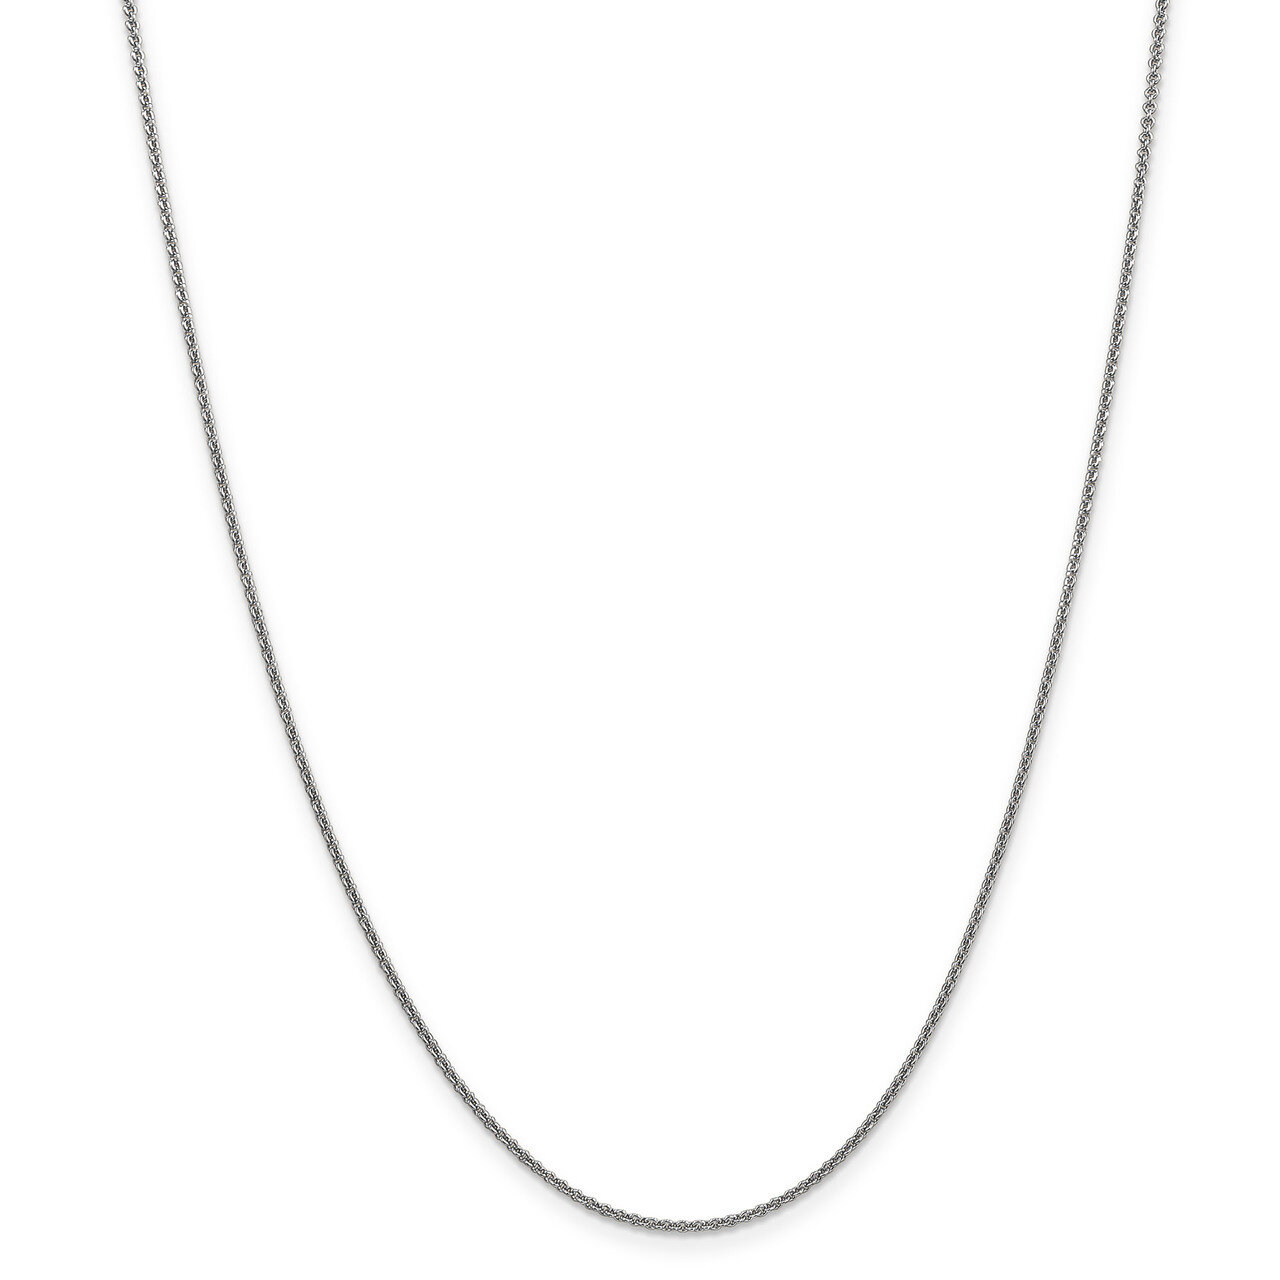 10 Inch 1.5mm Solid Polished Cable Chain 10k White Gold 10PE137-10